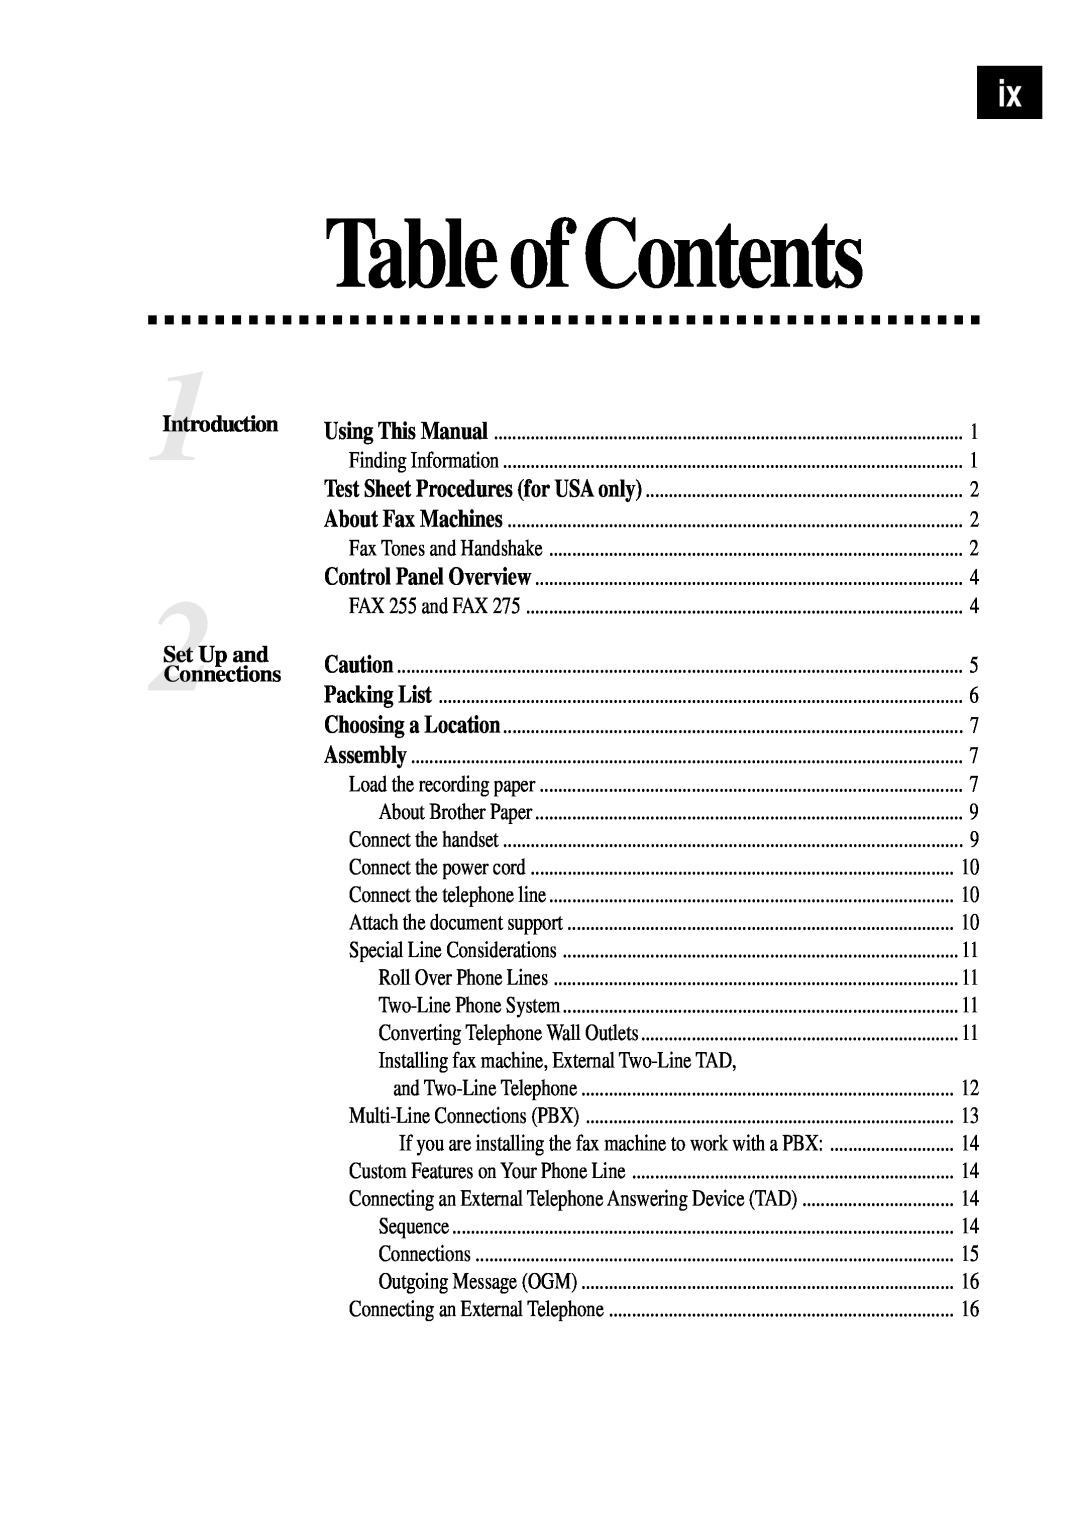 Brother FAX 255 owner manual Table of Contents, 1Introduction 